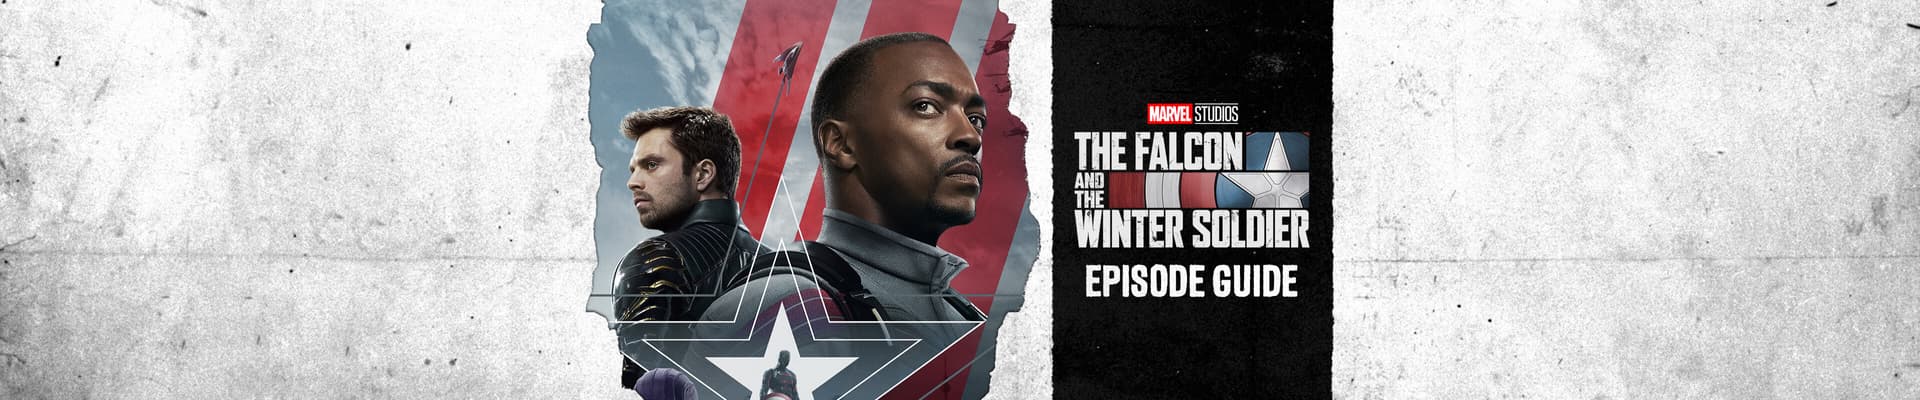 Marvel Studios' The Falcon and The Winter Soldier Disney Plus TV Show Season 1 Poster